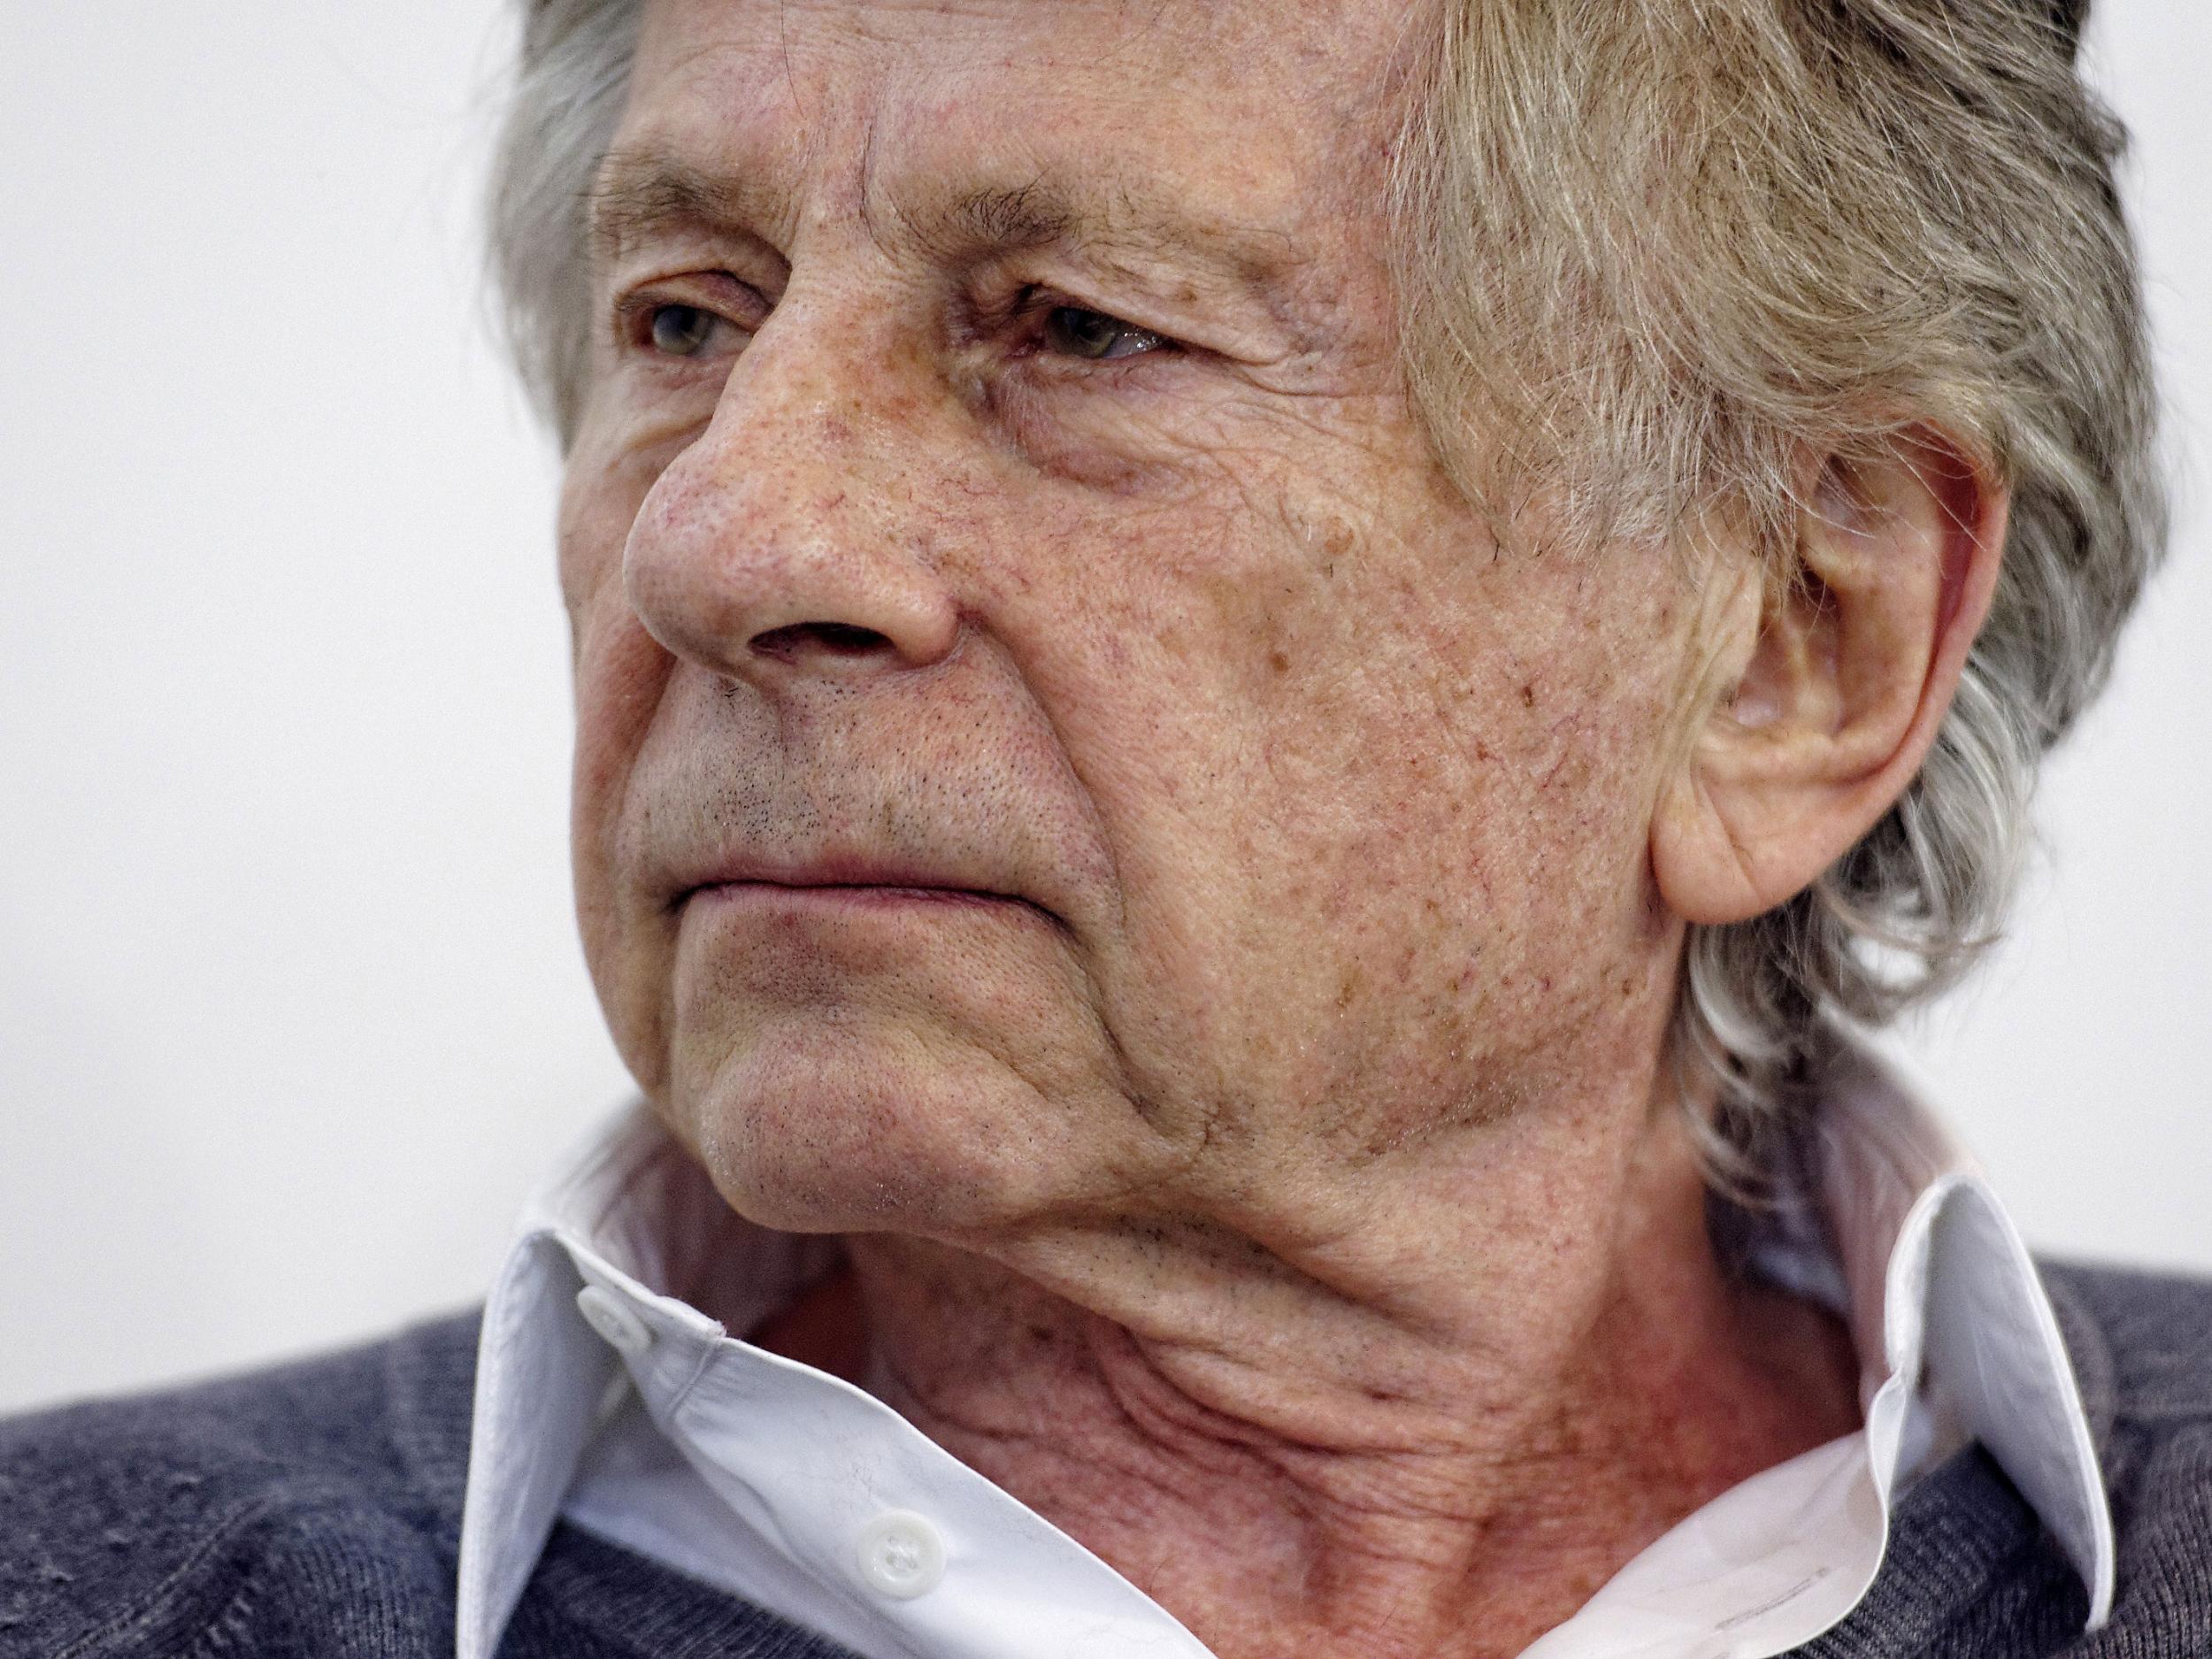 Polanski's lawyer said they felt 'great relief that this case has ended'